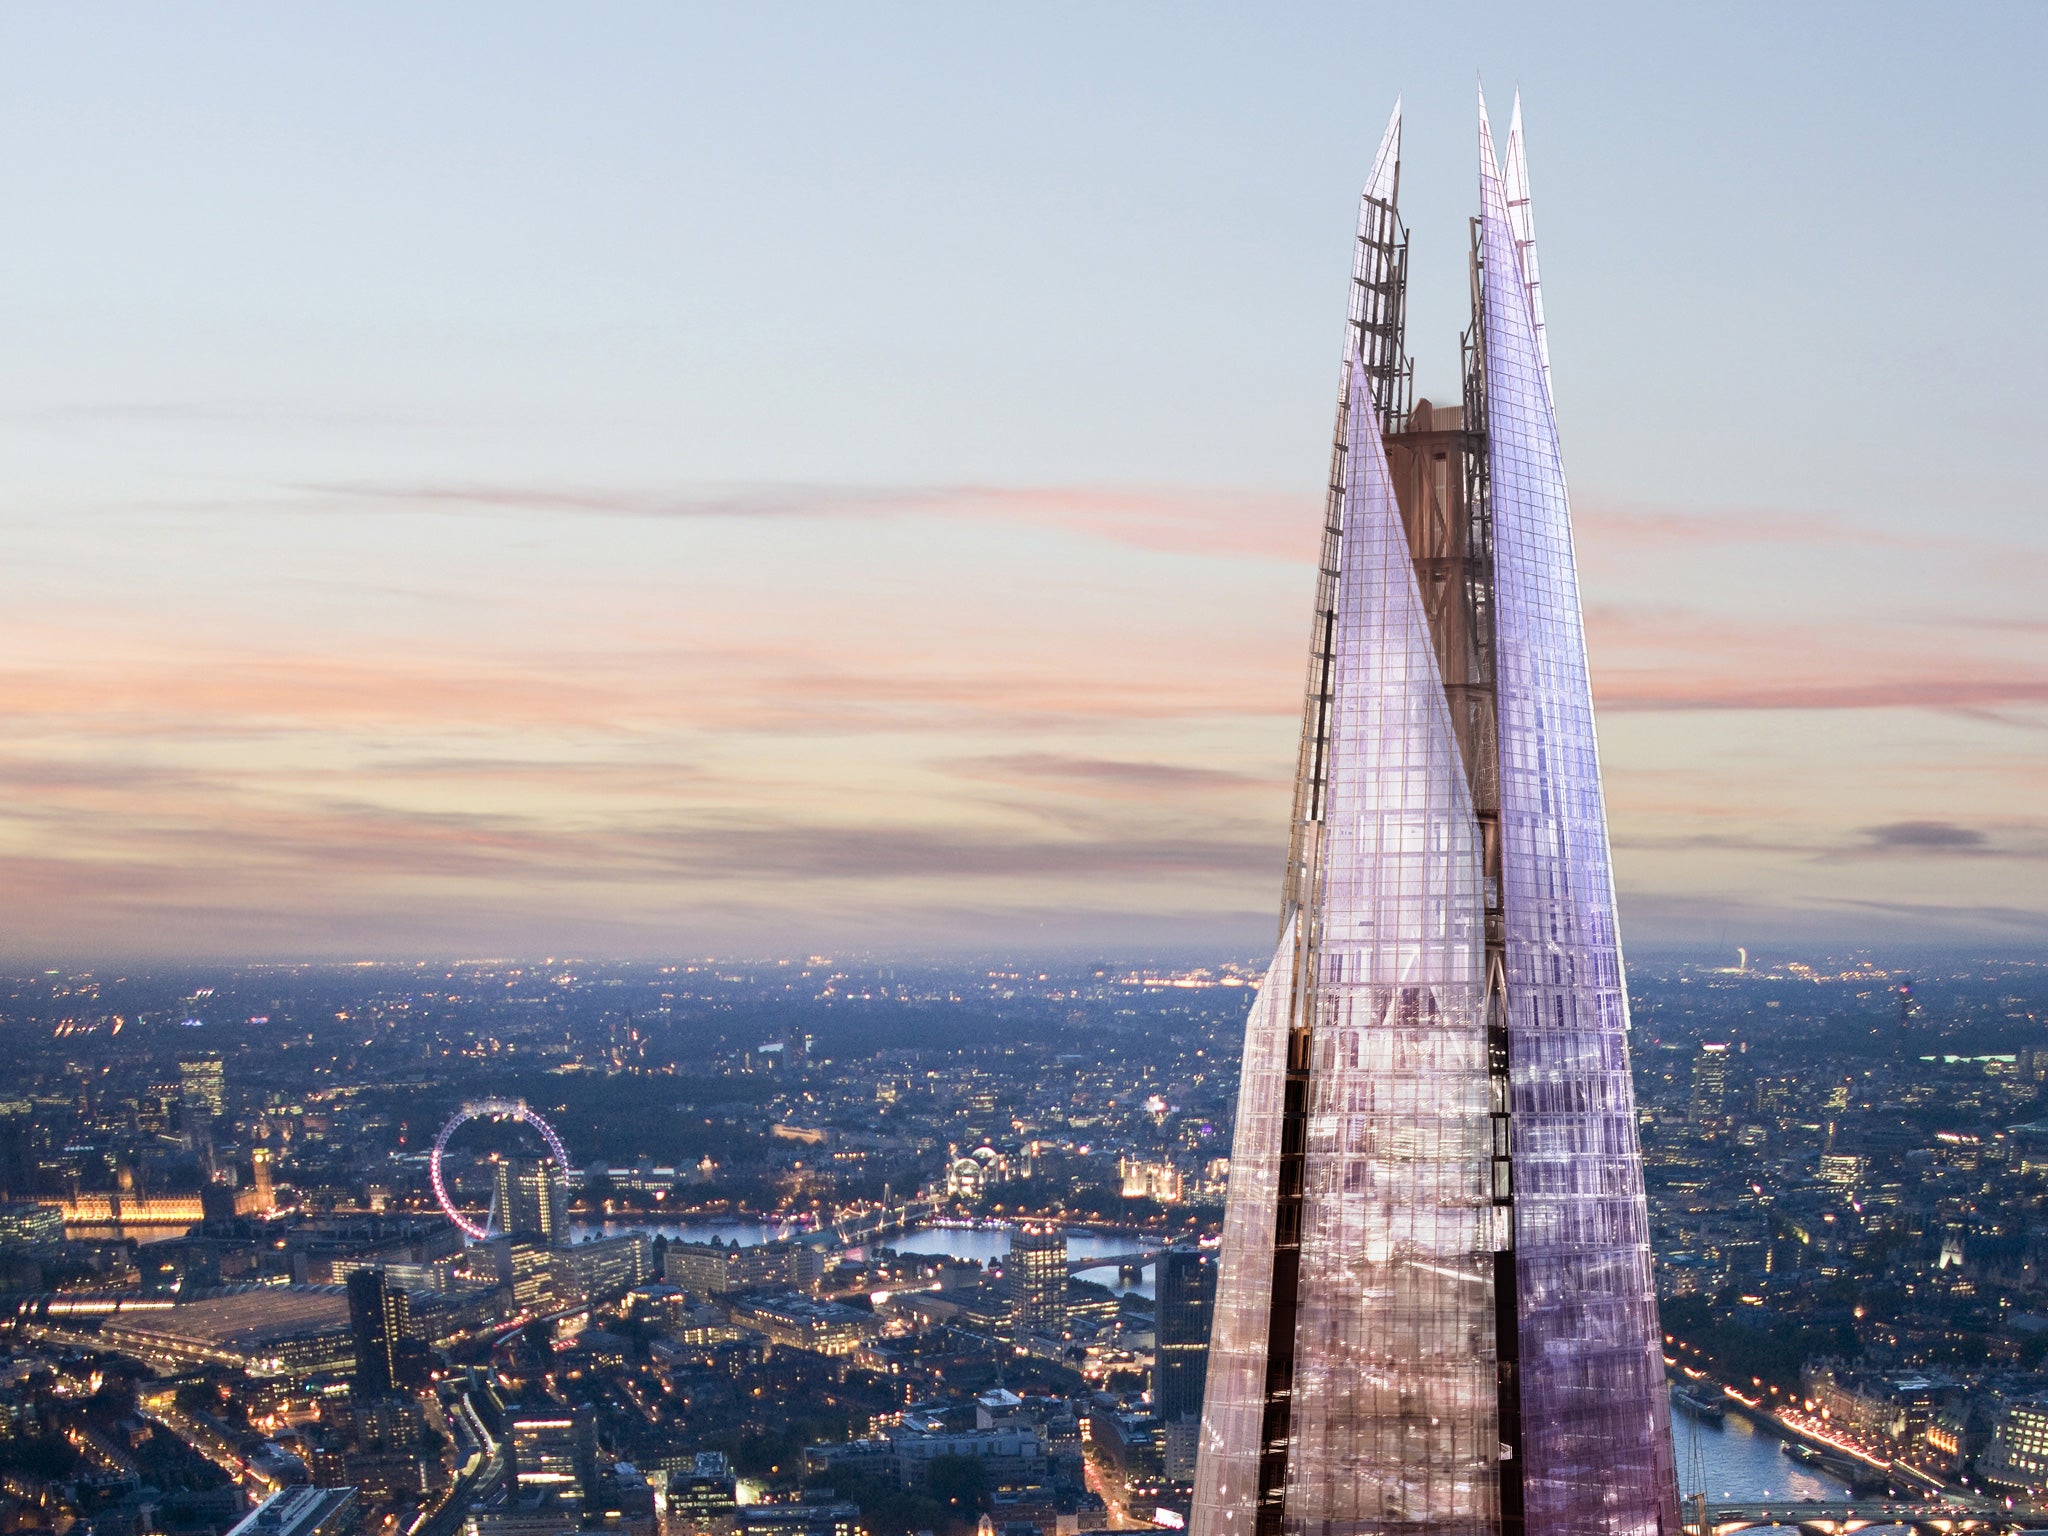 The pinnacle of The Shard